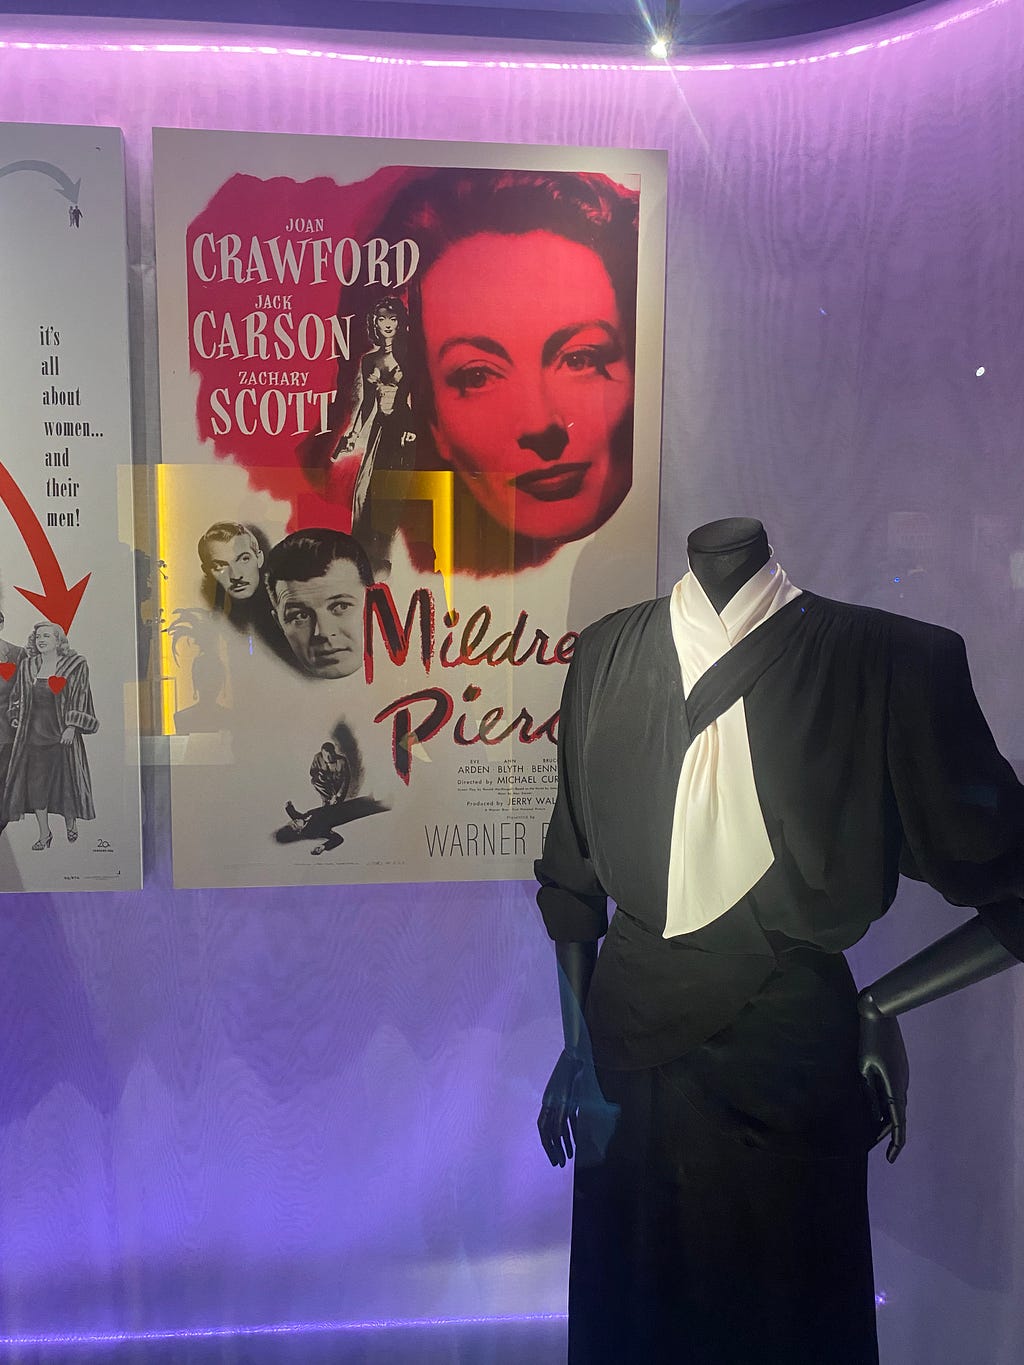 Mildred Pierce film poster and padded power suit worn by Joan Crawford in the film in 1945